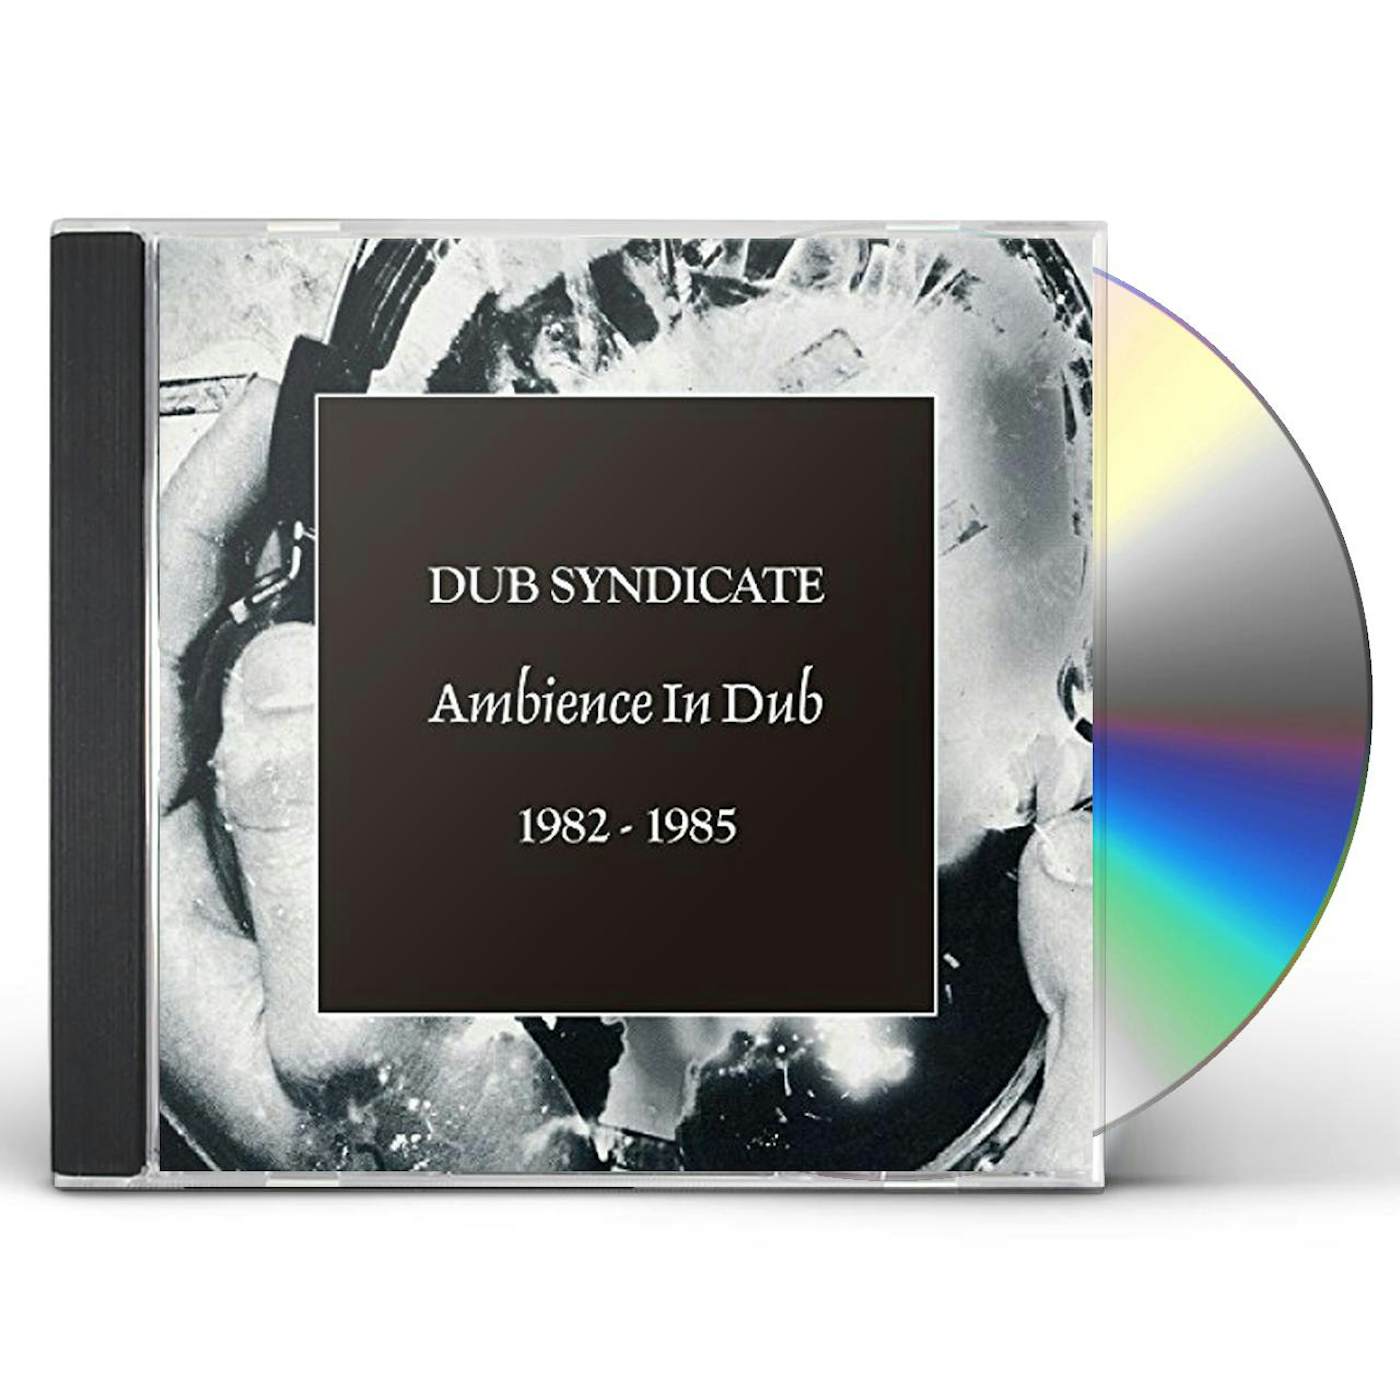 Dub Syndicate AMBIENCE IN DUB CD